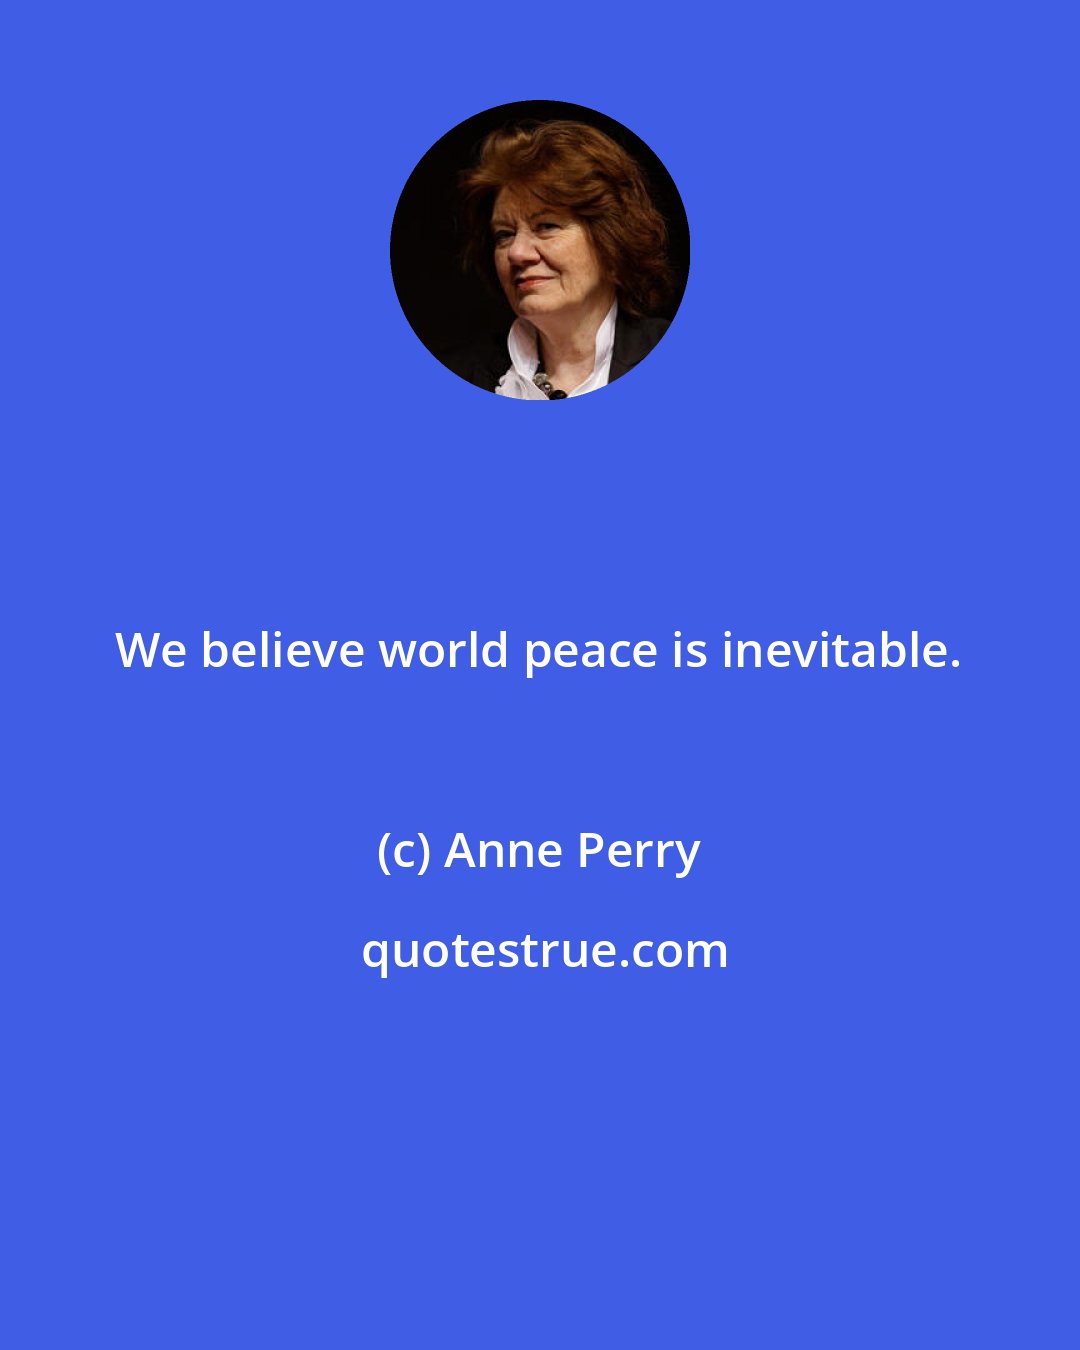 Anne Perry: We believe world peace is inevitable.